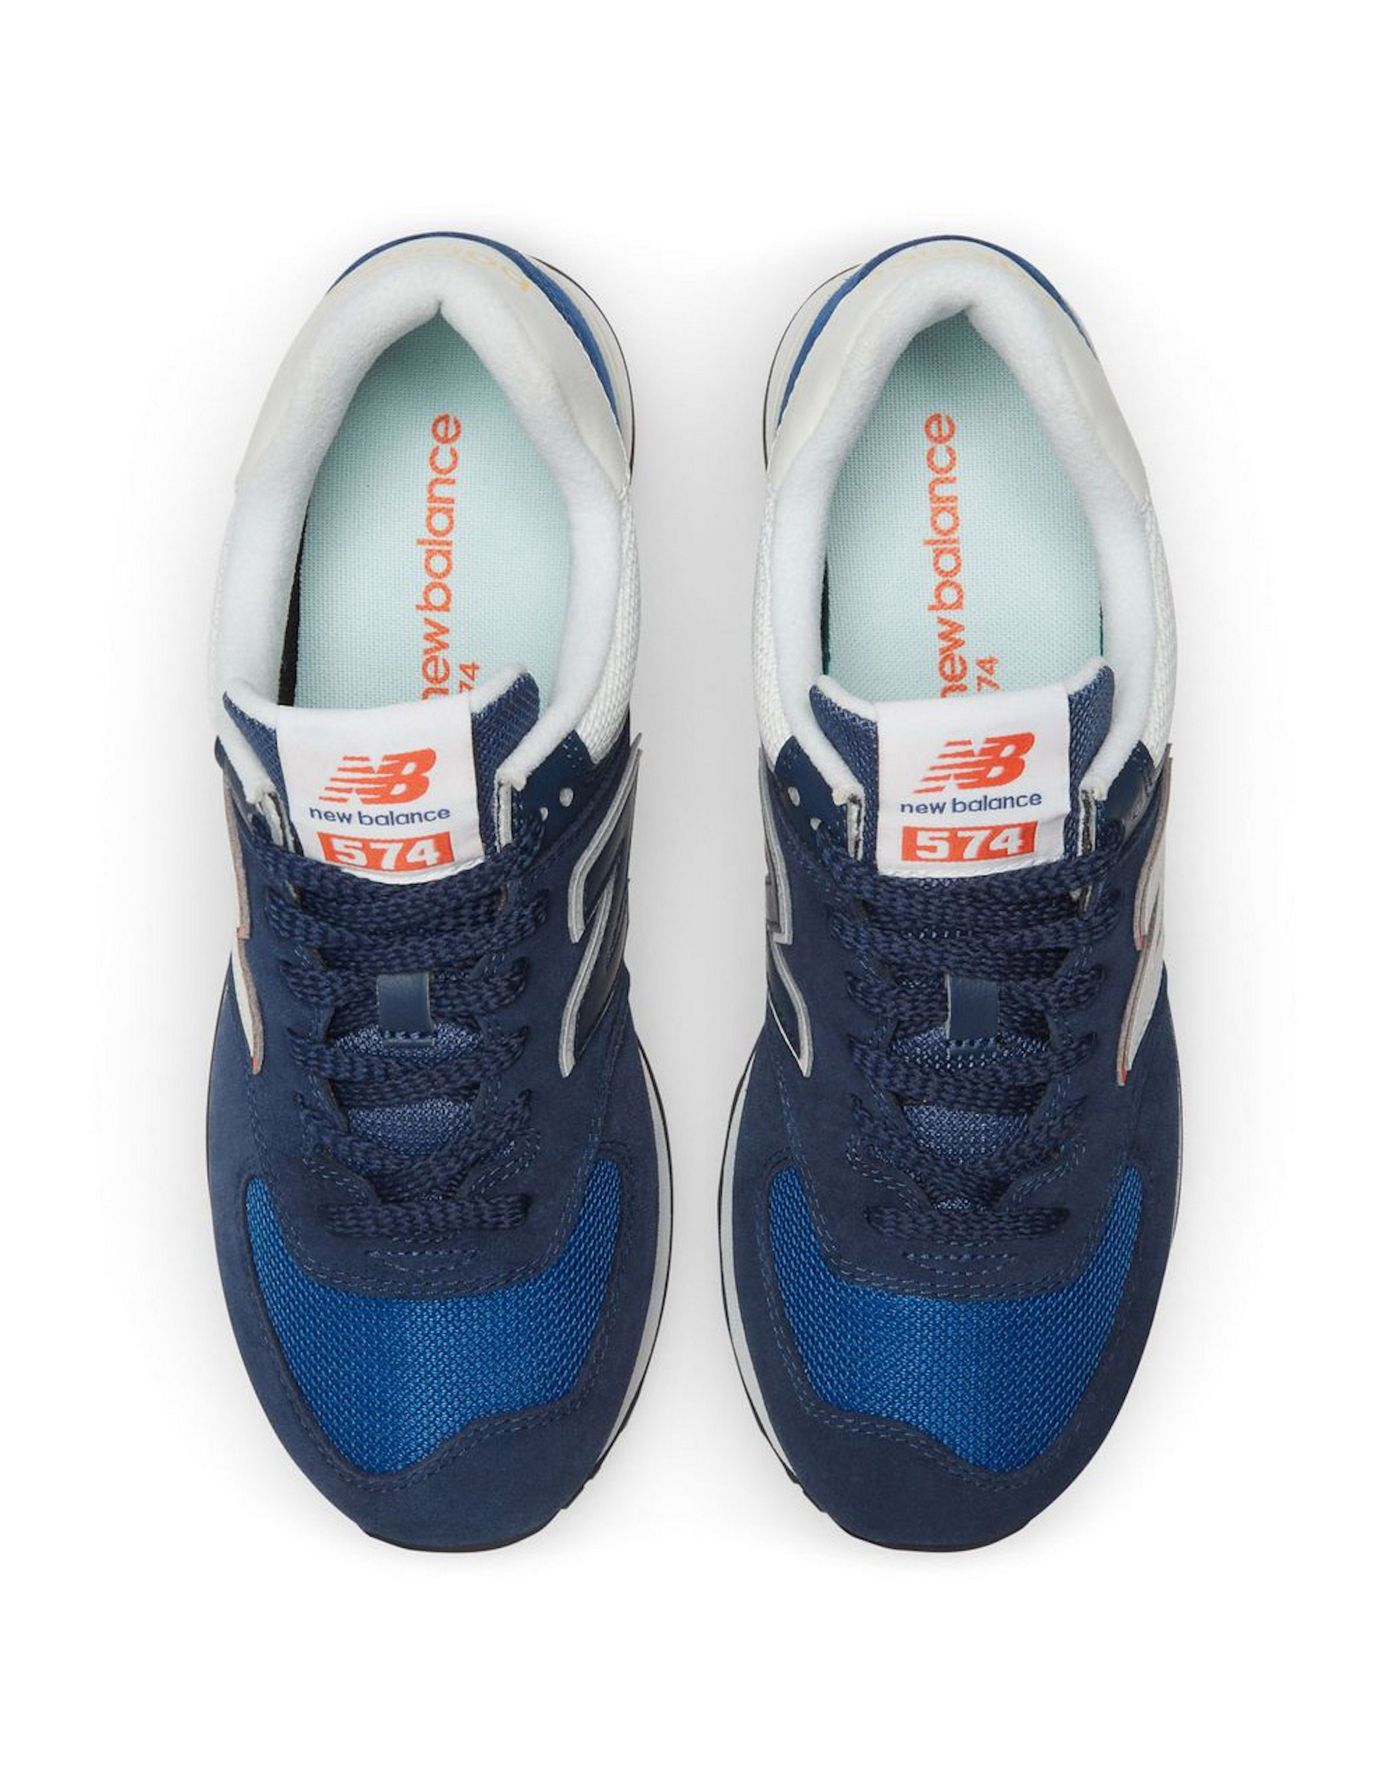 New Balance 574 trainers in blue